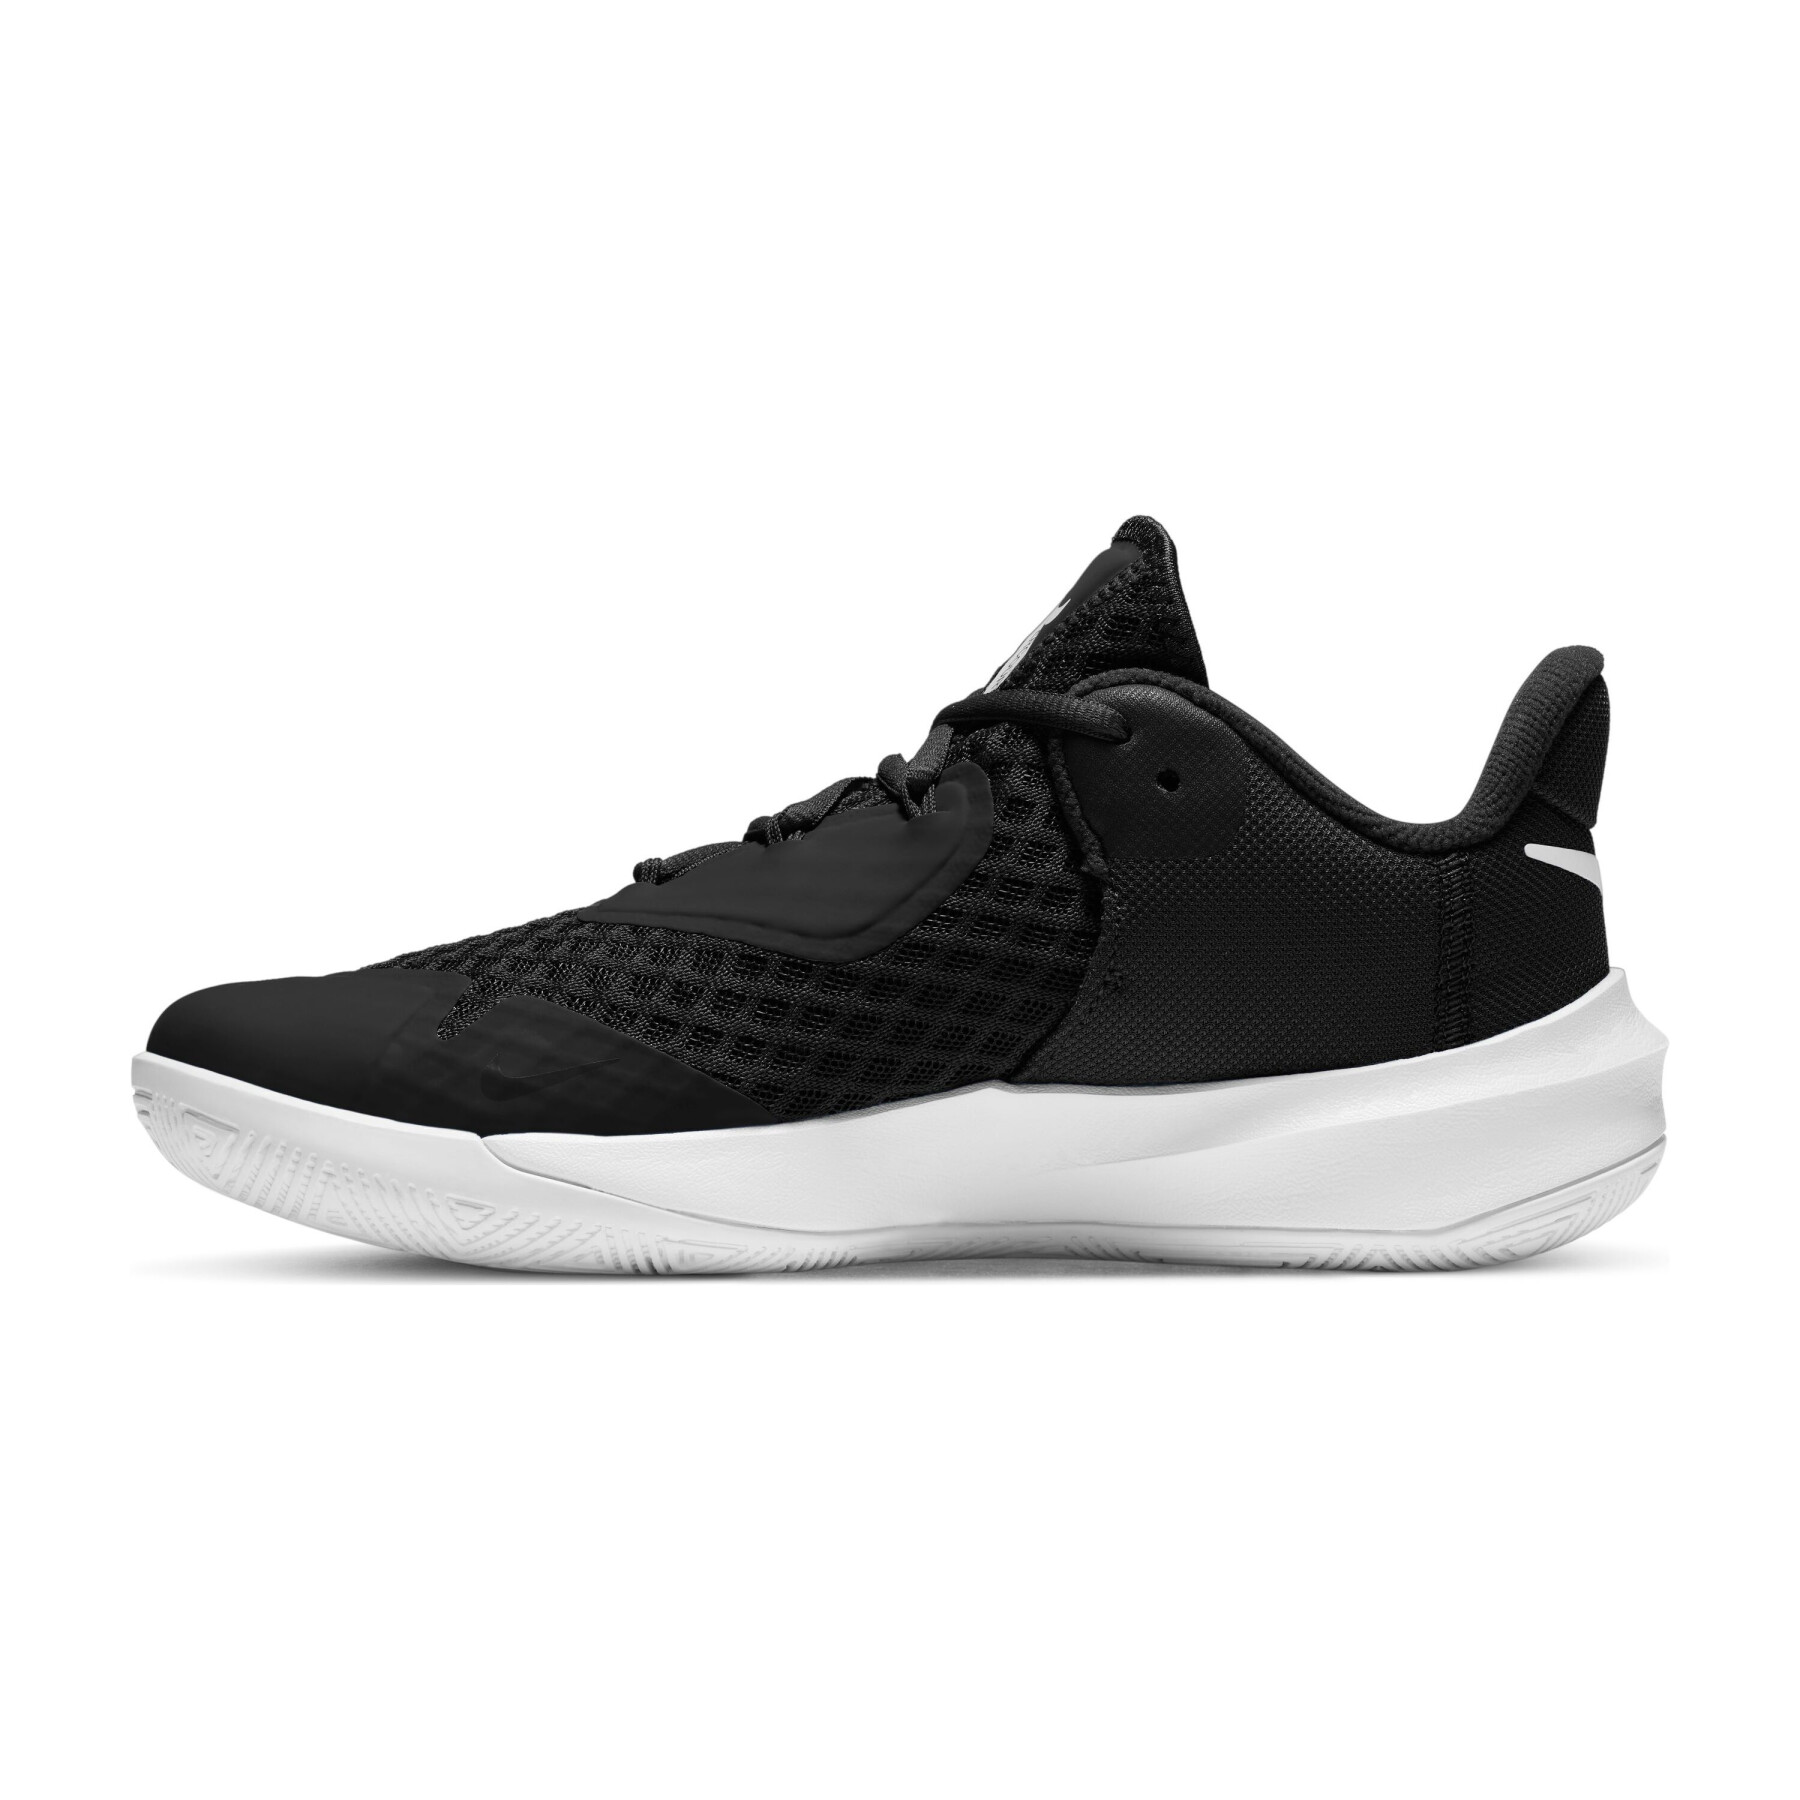 Chaussures femme Nike Hyperspeed Court